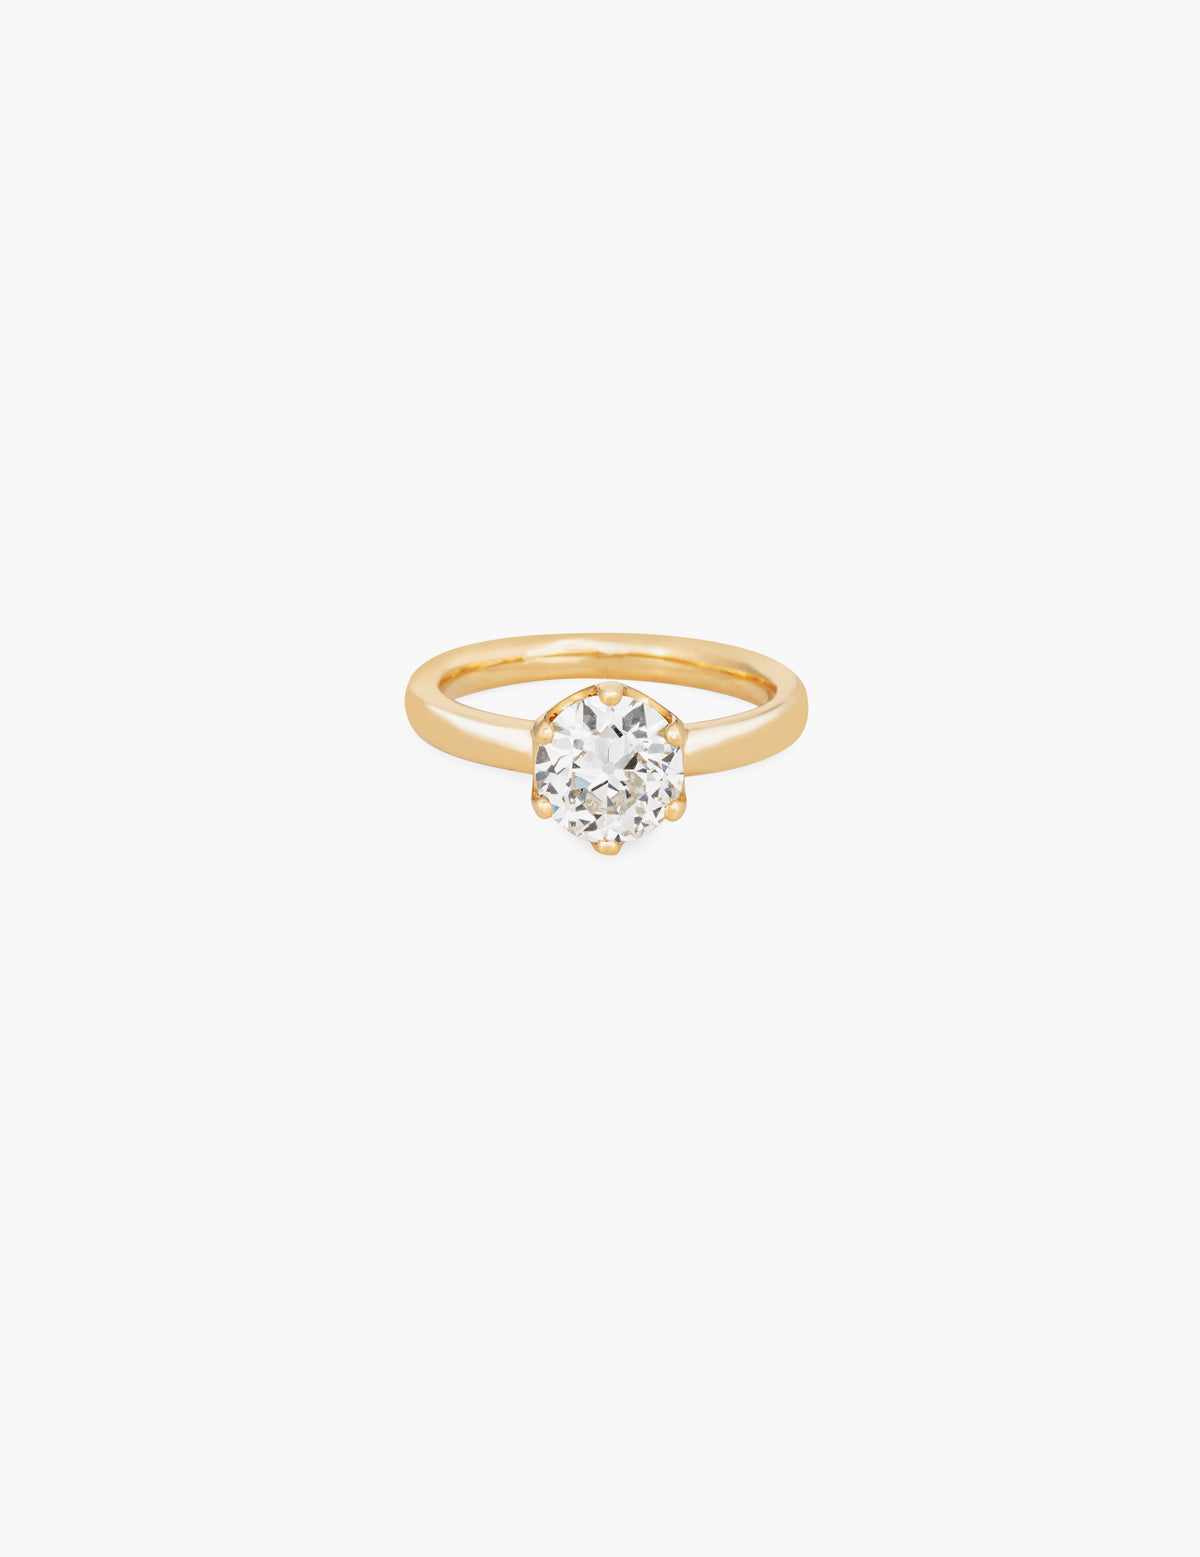 Stella Ring with 1.41ct Natural Diamond